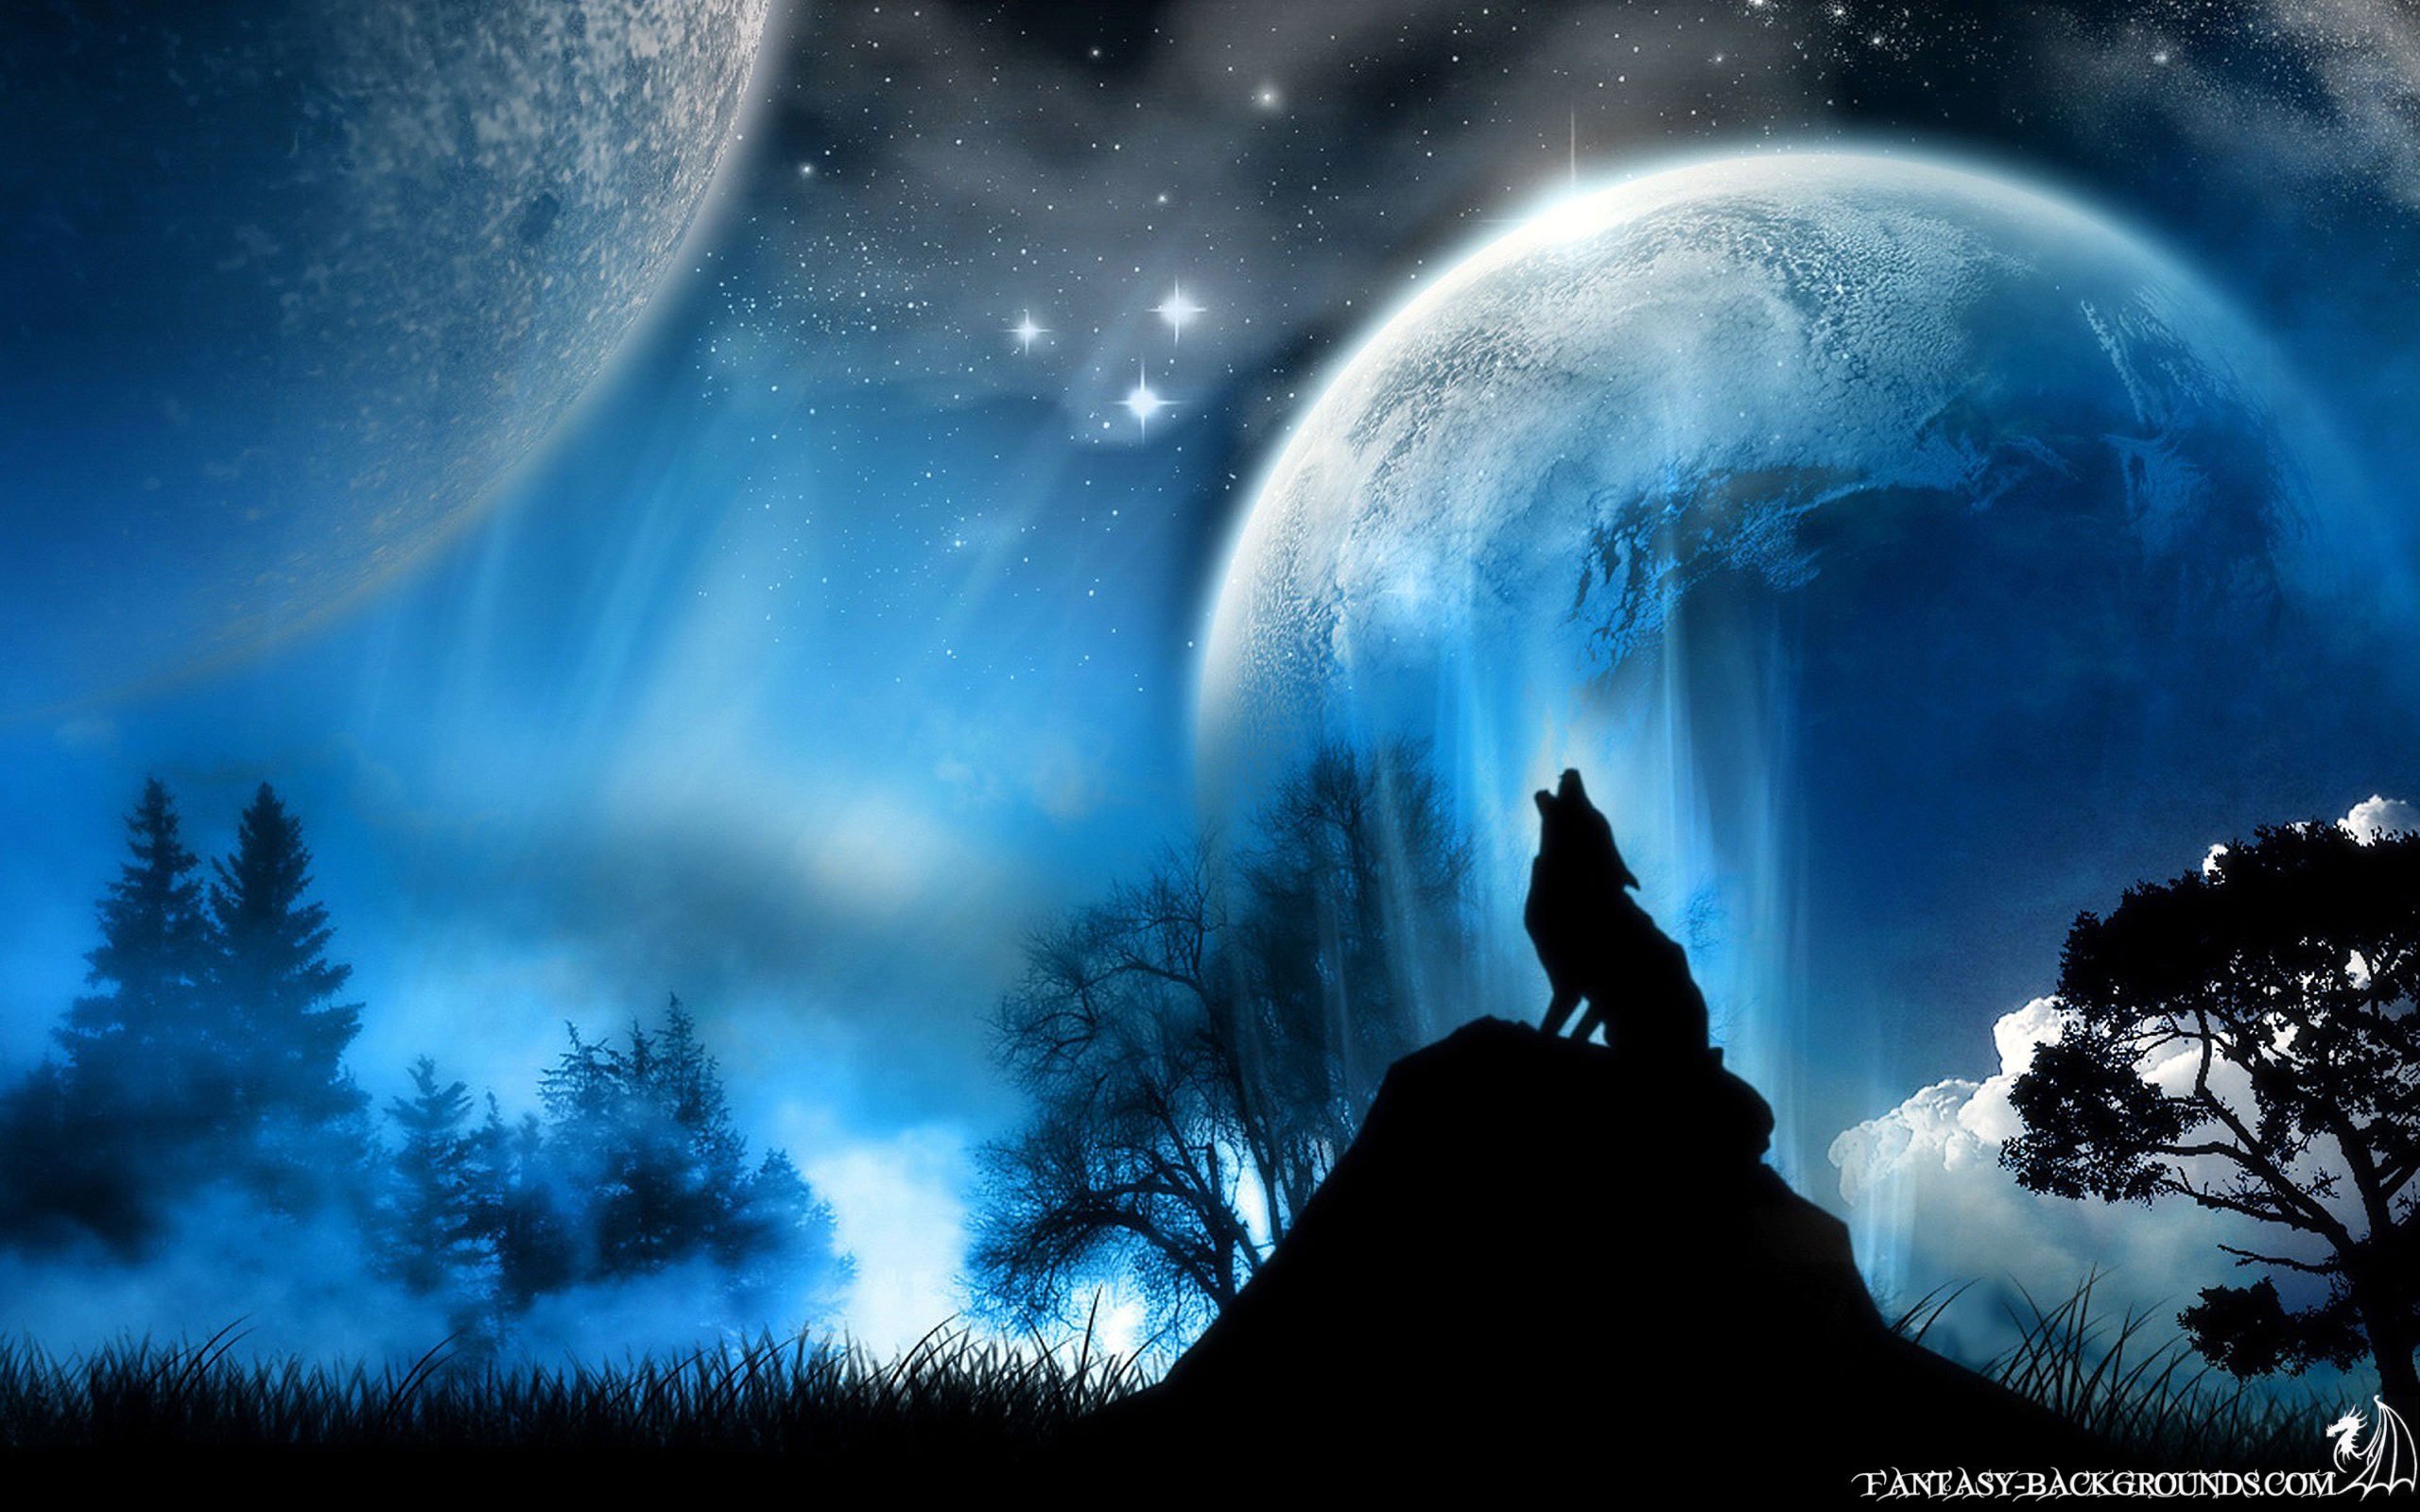 General 2560x1600 wolf vector fantasy art nature planet night sky animals howling watermarked sky